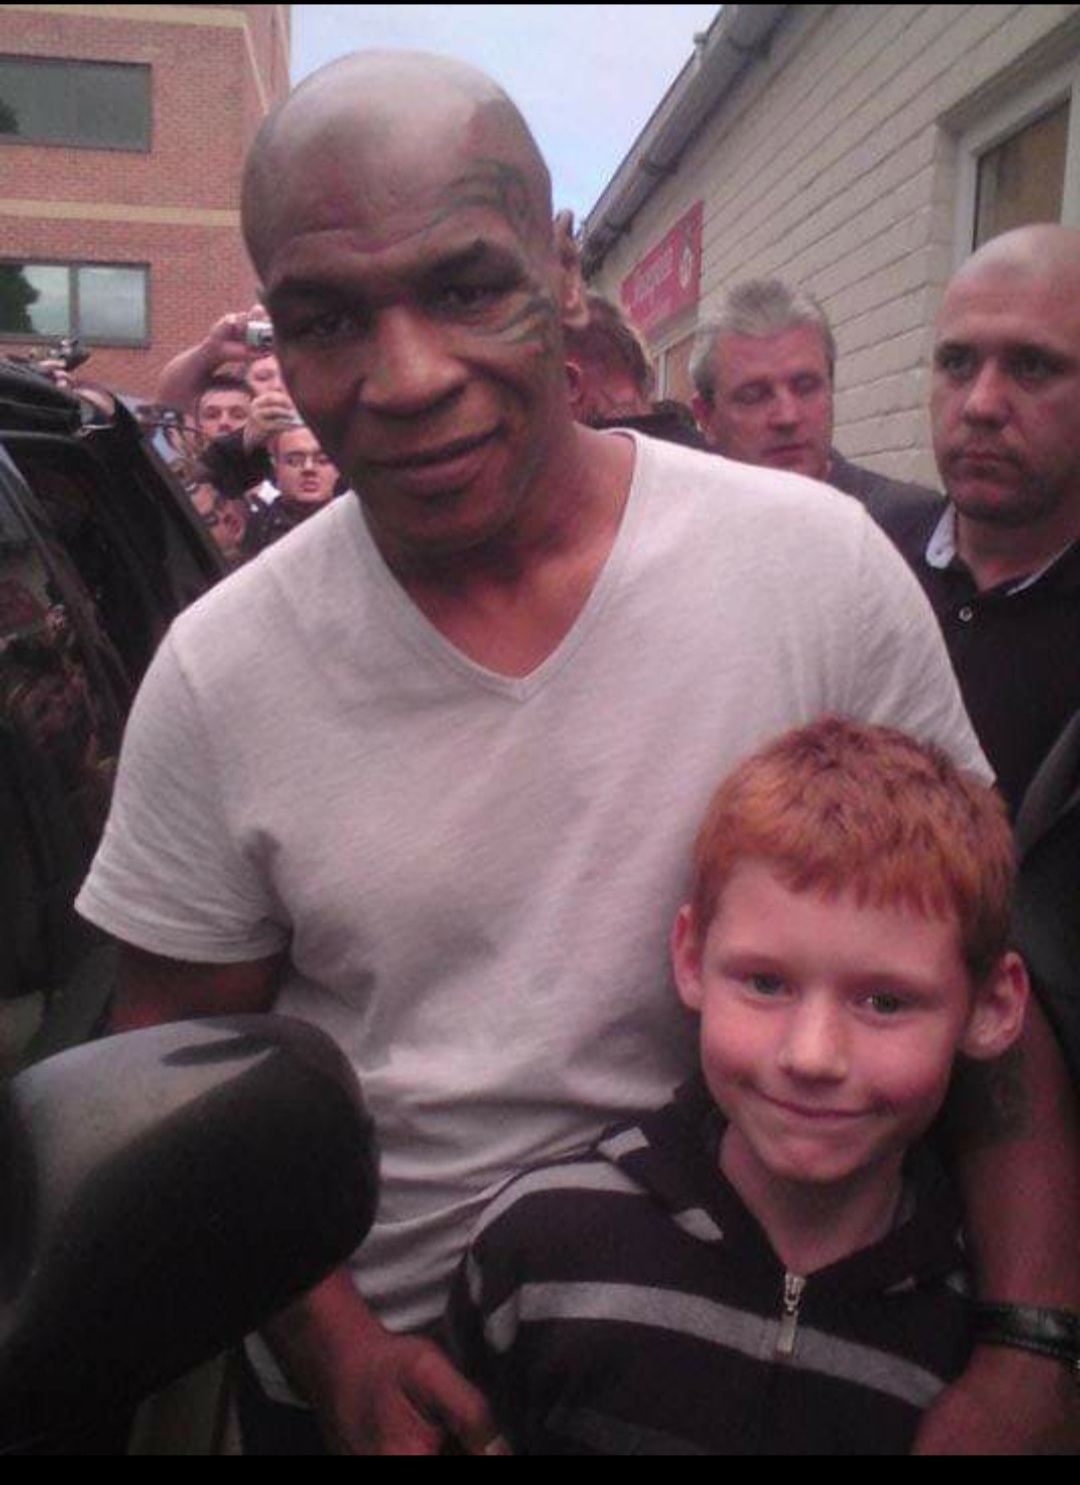 Rebecca Griffiths, from Gwersyllt, has this photo of a special meeting for son Liam Roberts, 13 years ago: Mike Tyson saw my son as he was leaving the event at the Centenary Club at Wrexham FC and come over to meet him.